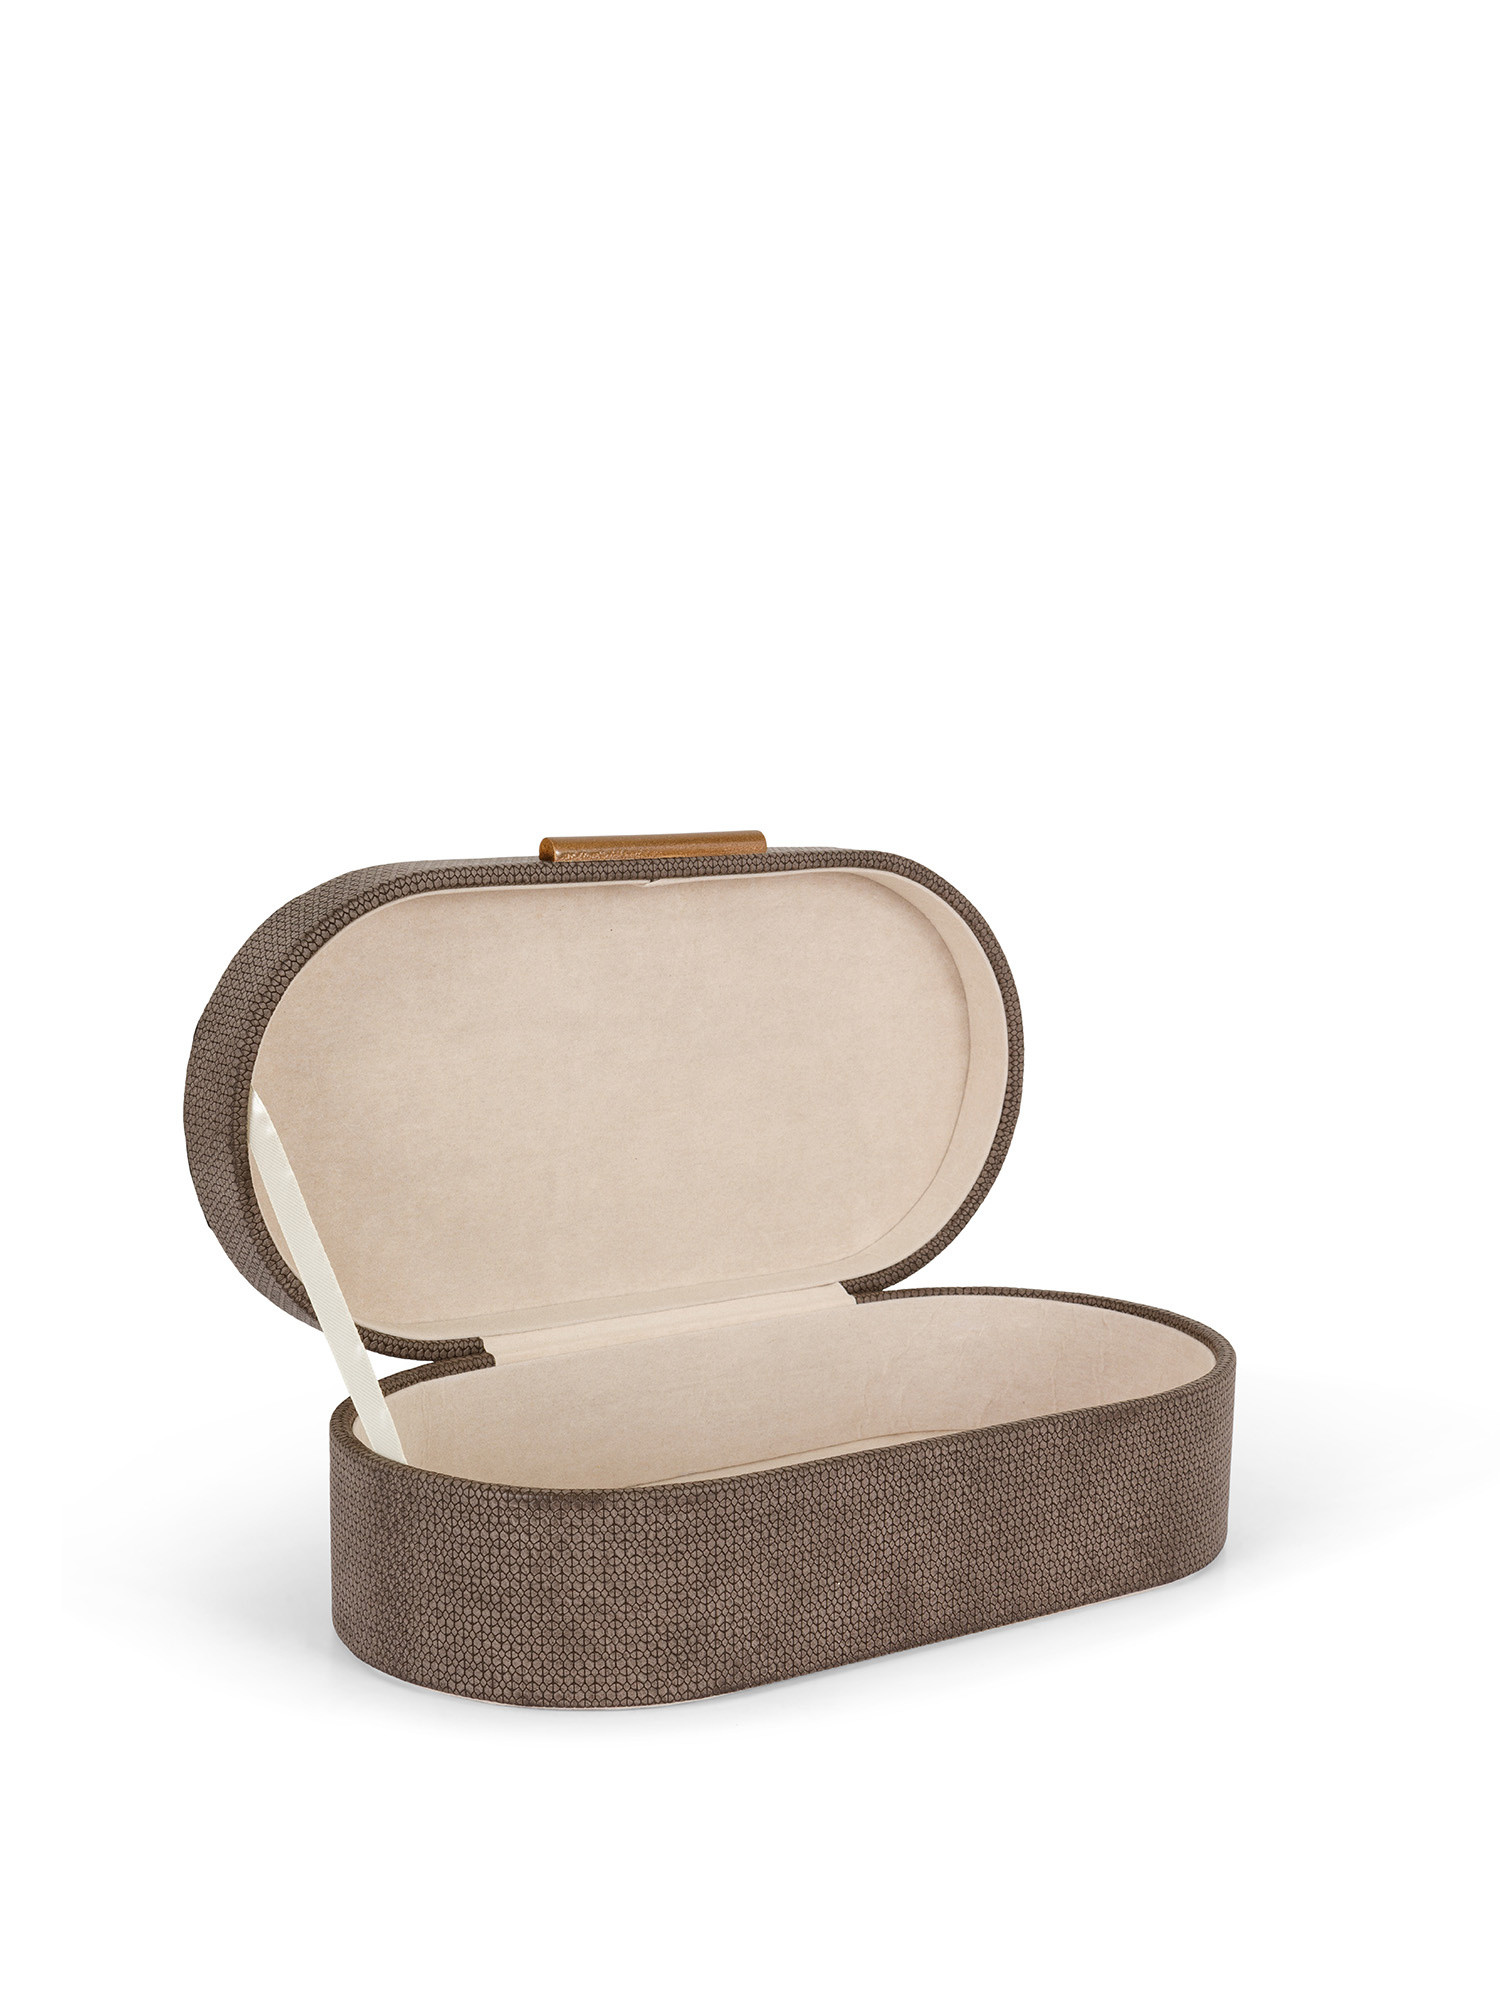 Jewelery box with golden closure, Grey, large image number 1